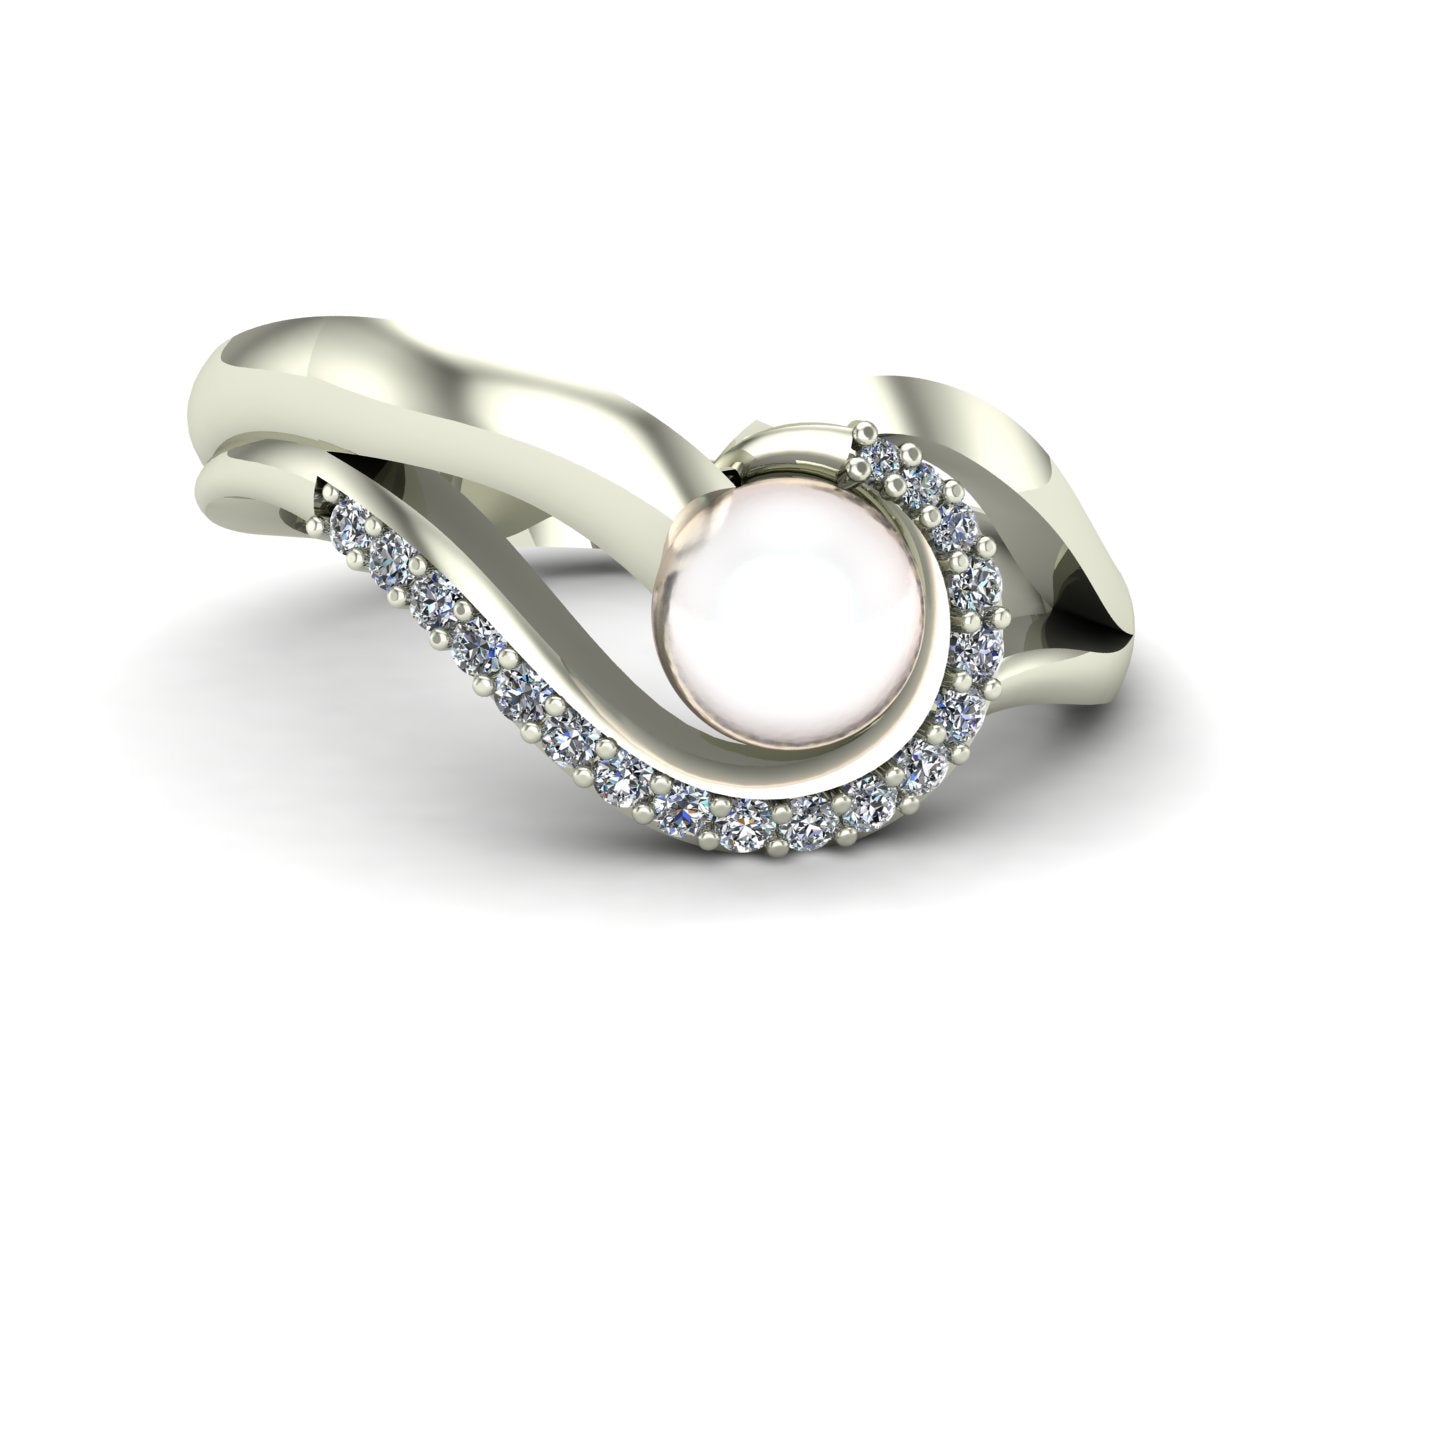 pearl and diamond swirl ring in 14k white gold - Charles Babb Designs - top view